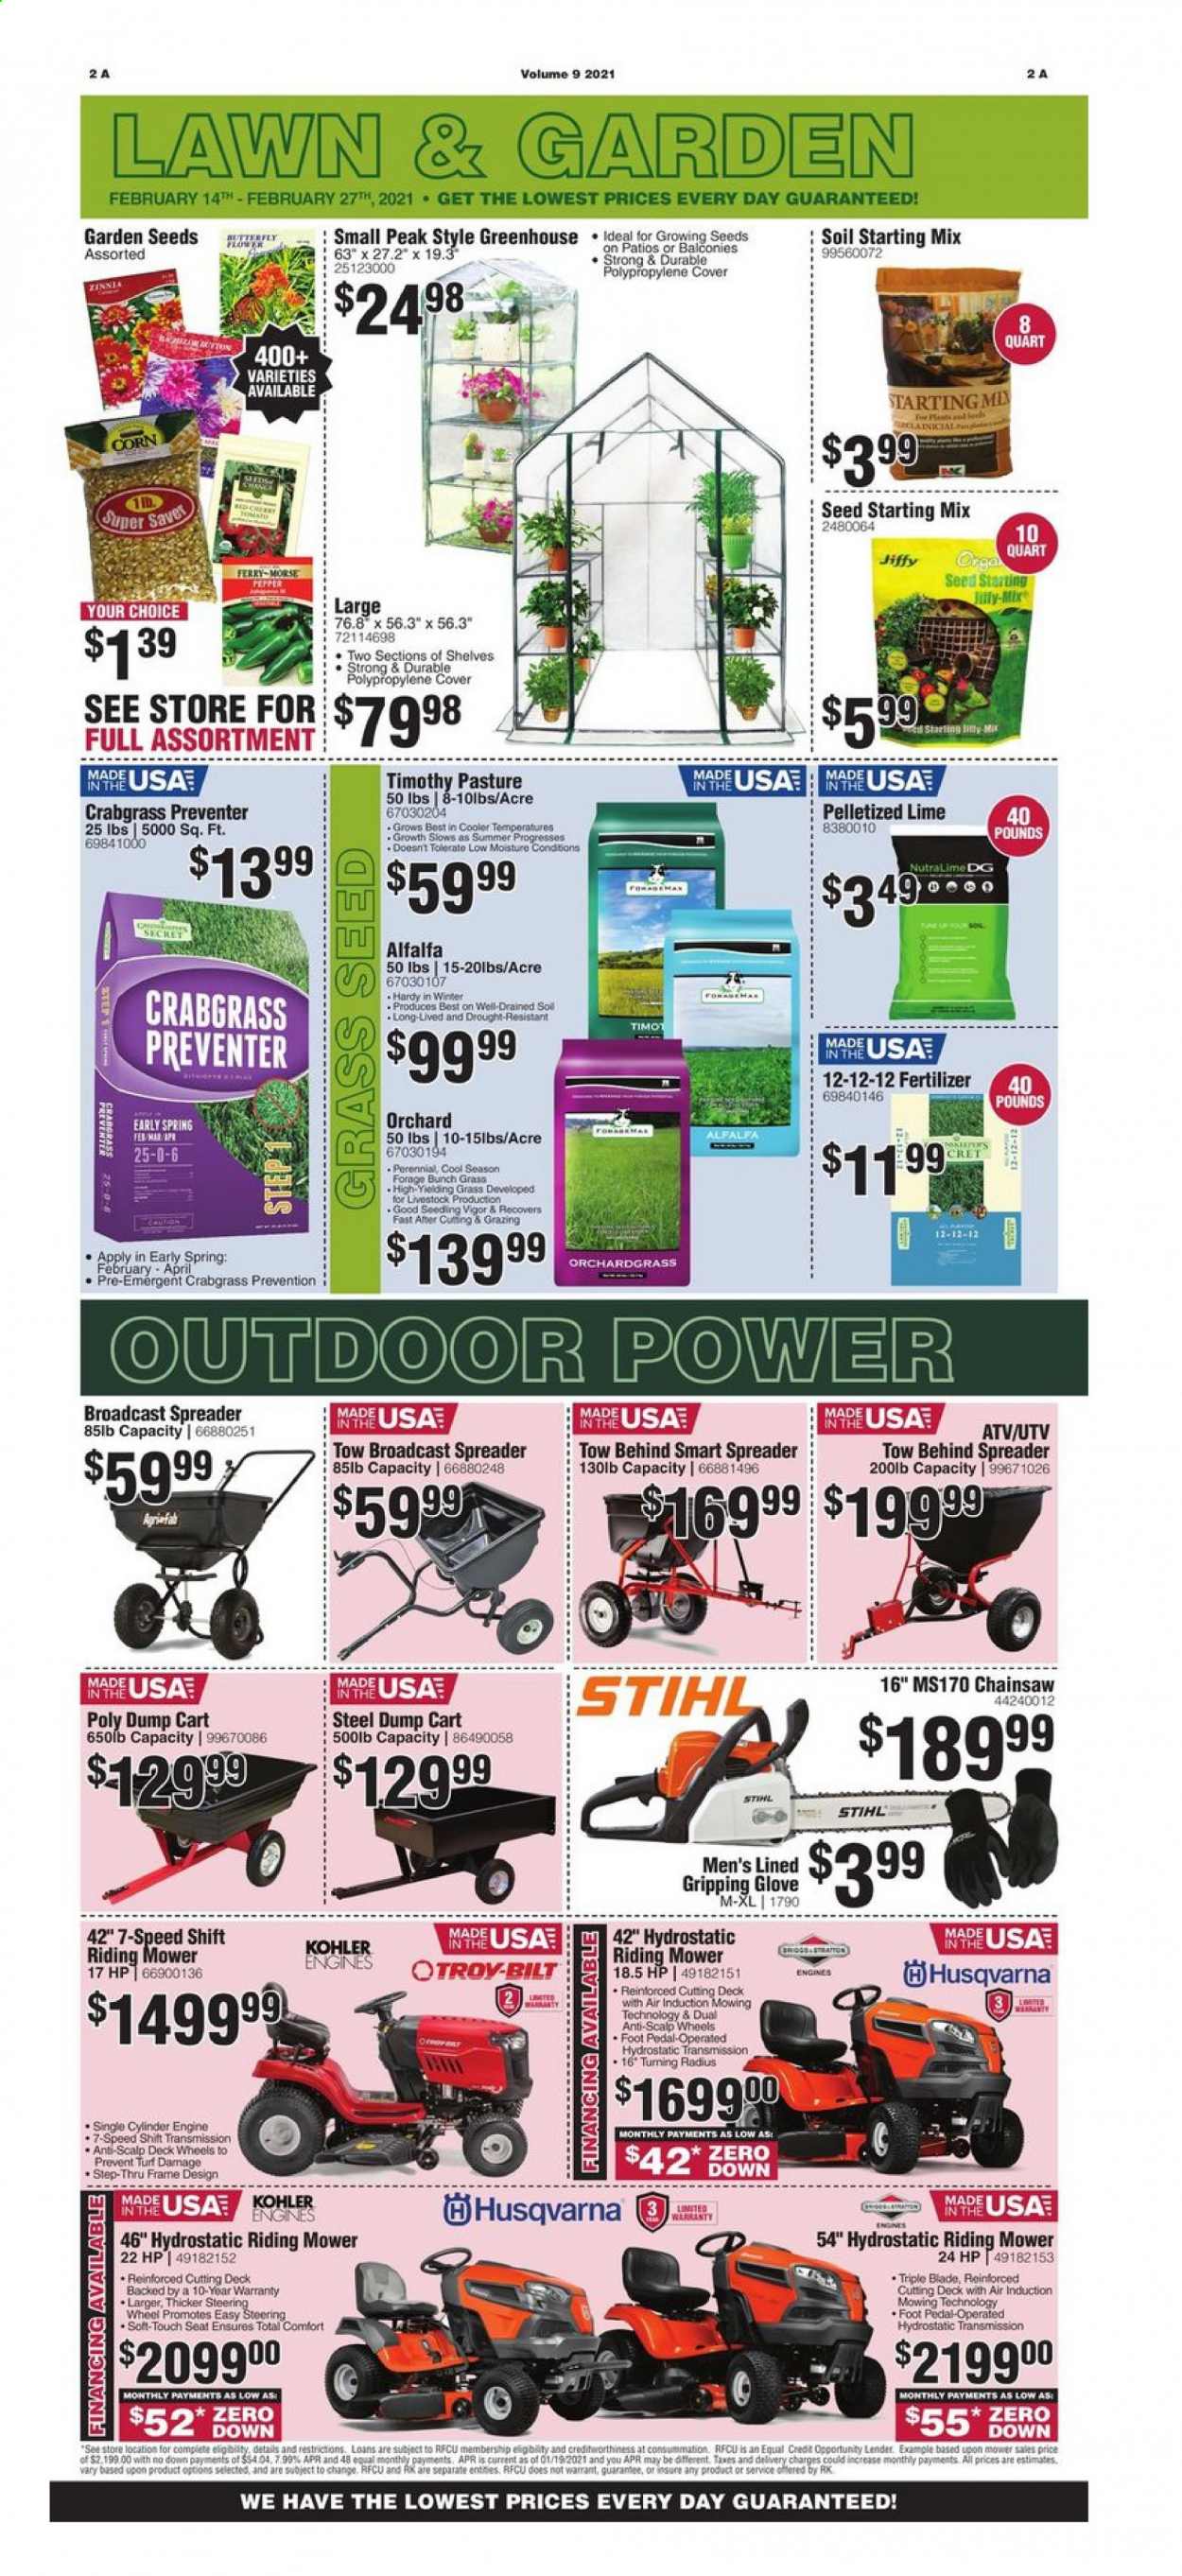 thumbnail - Rural King Flyer - 02/14/2021 - 02/27/2021 - Sales products - corn, pepper, Sol, Hewlett Packard, gloves, chain saw, spreader, greenhouse, plant seeds, zinnia, Jiffy, soil starting mix, seed starting mix, Timothy pasture, pelletized lime, fertilizer, cart, grass seed, crabgrass preventer. Page 2.